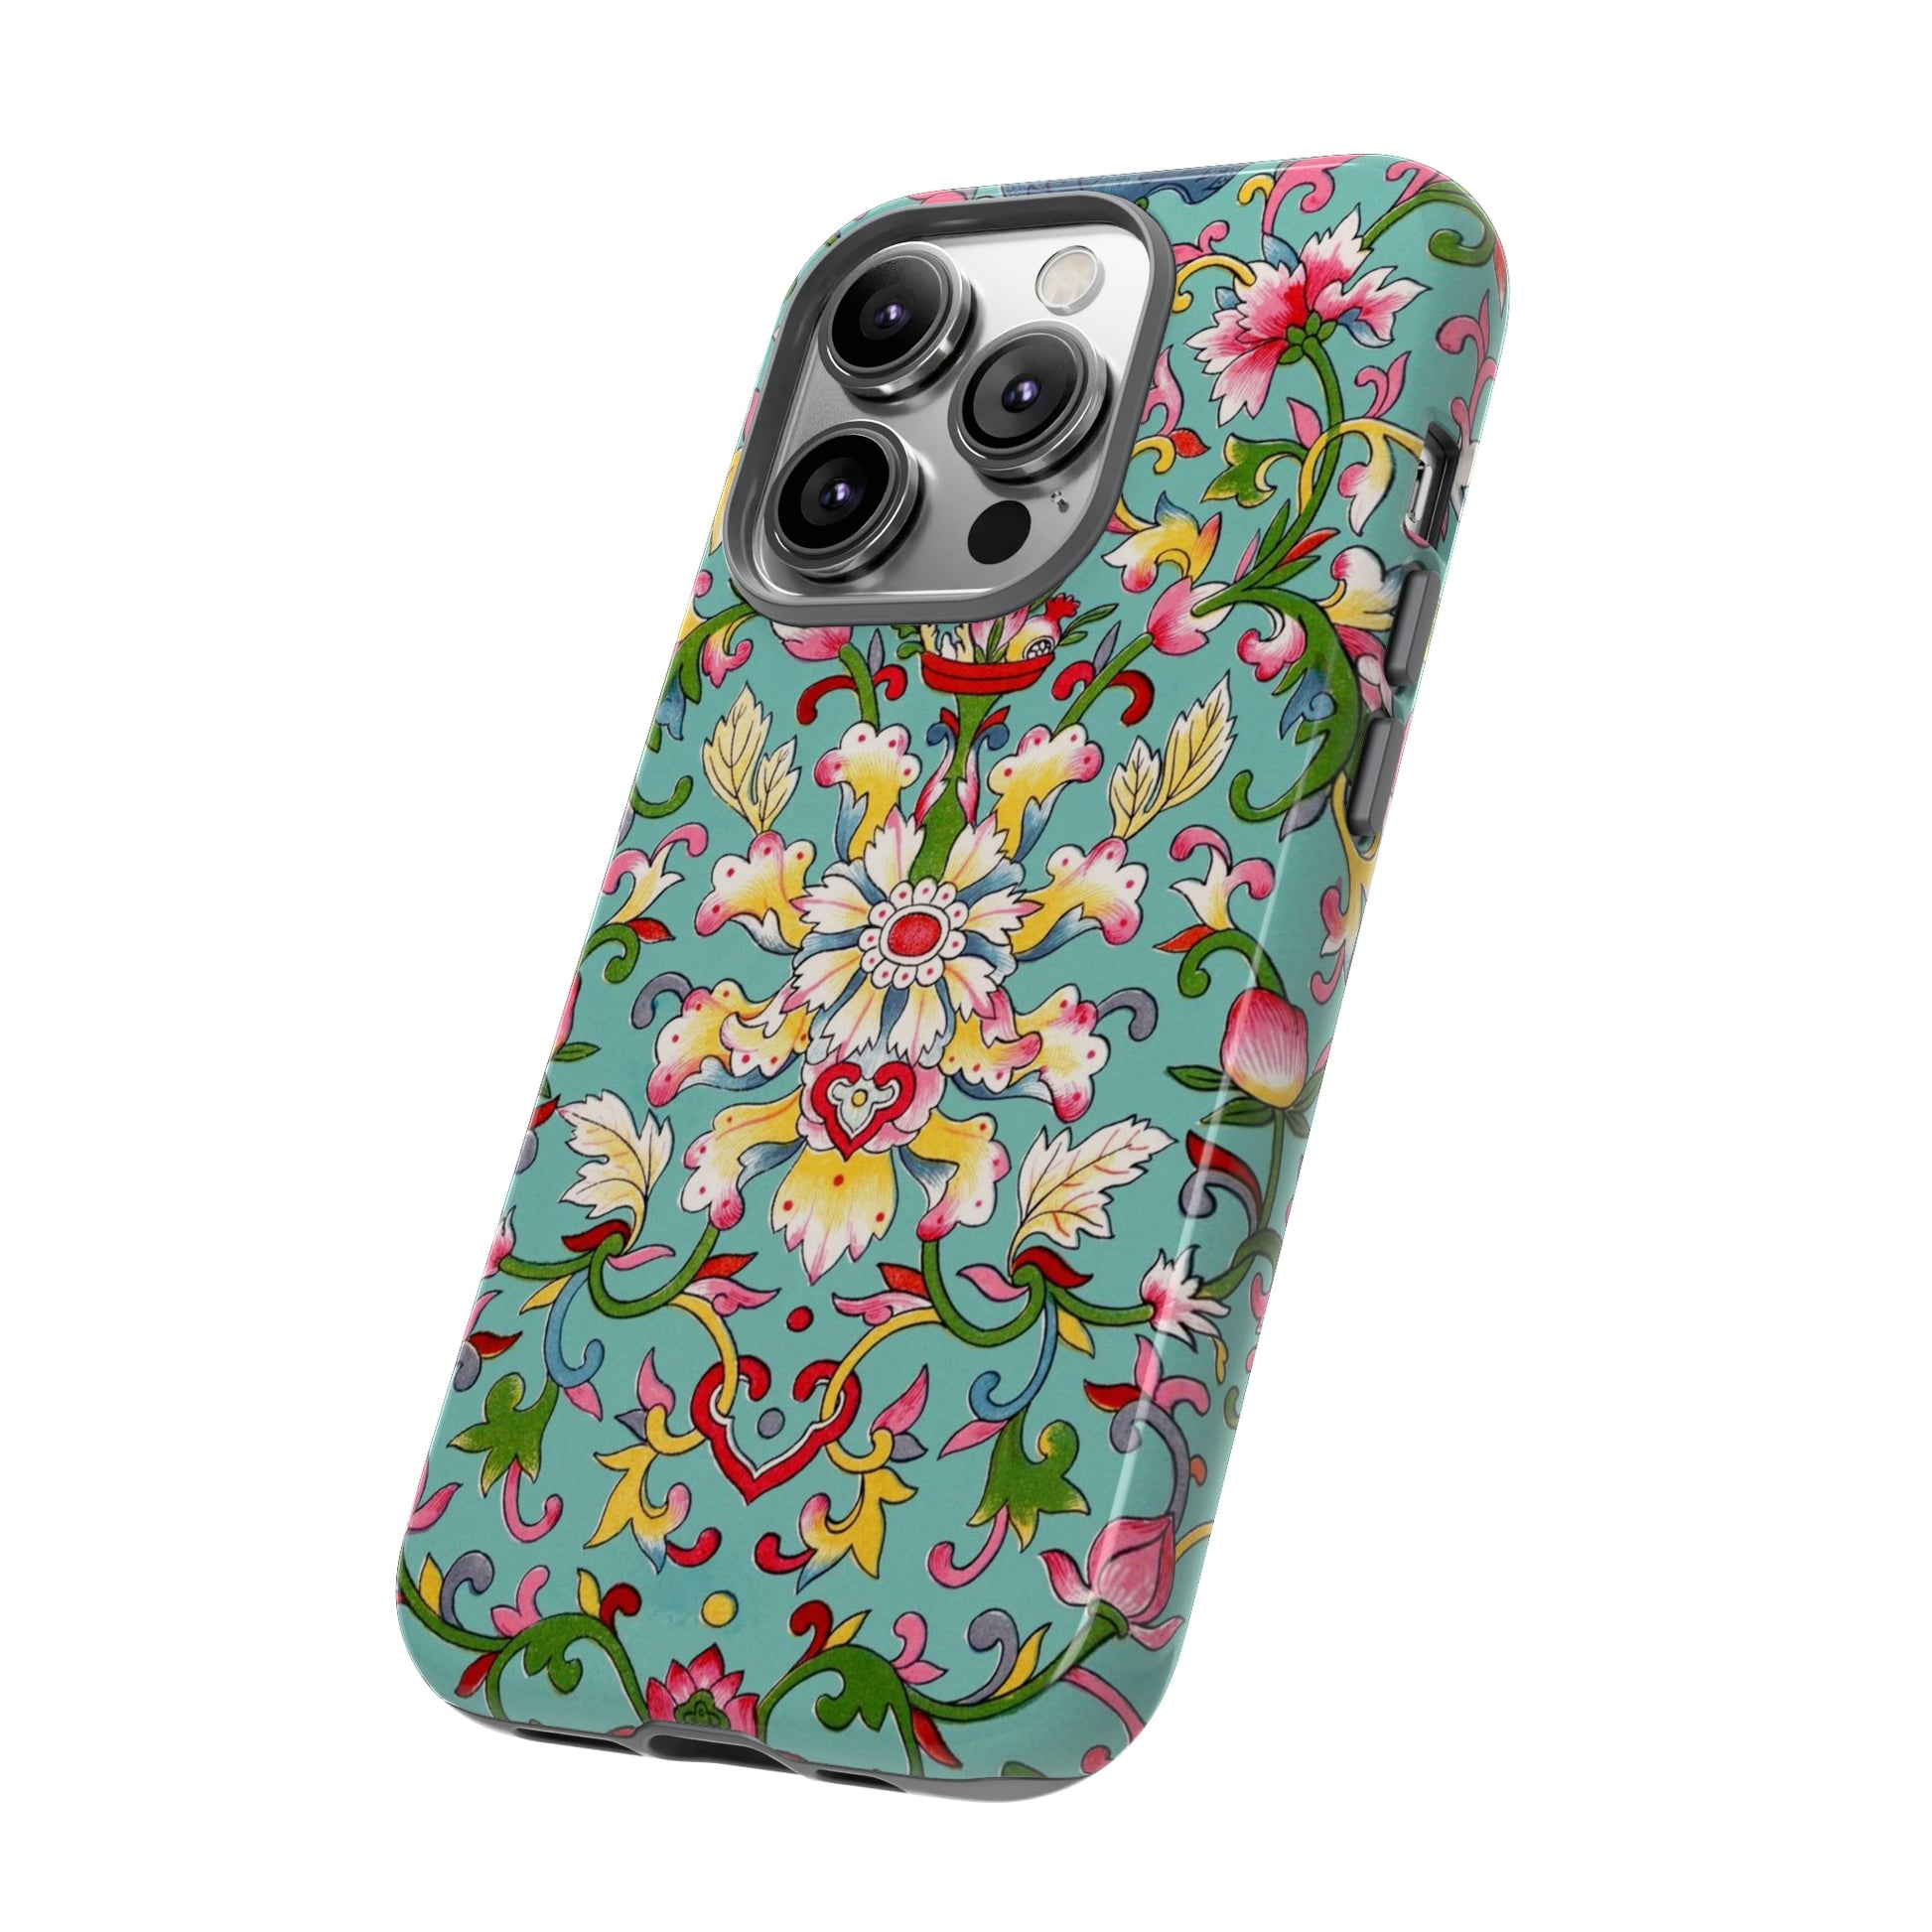 Floral Family Phone Case - BRYKNOLO LLC Phone Case